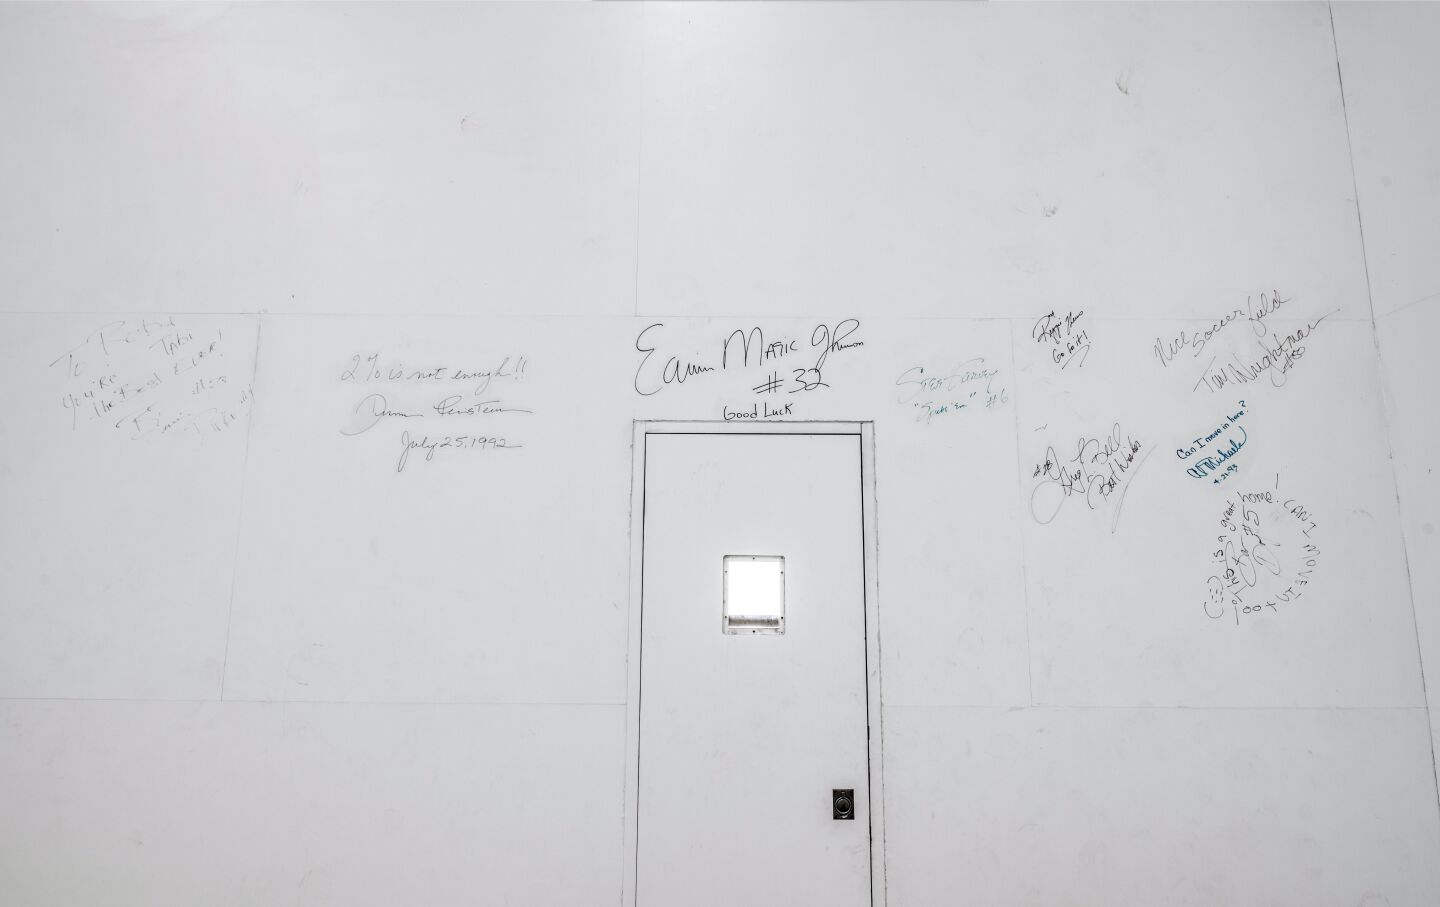 The signed wall.